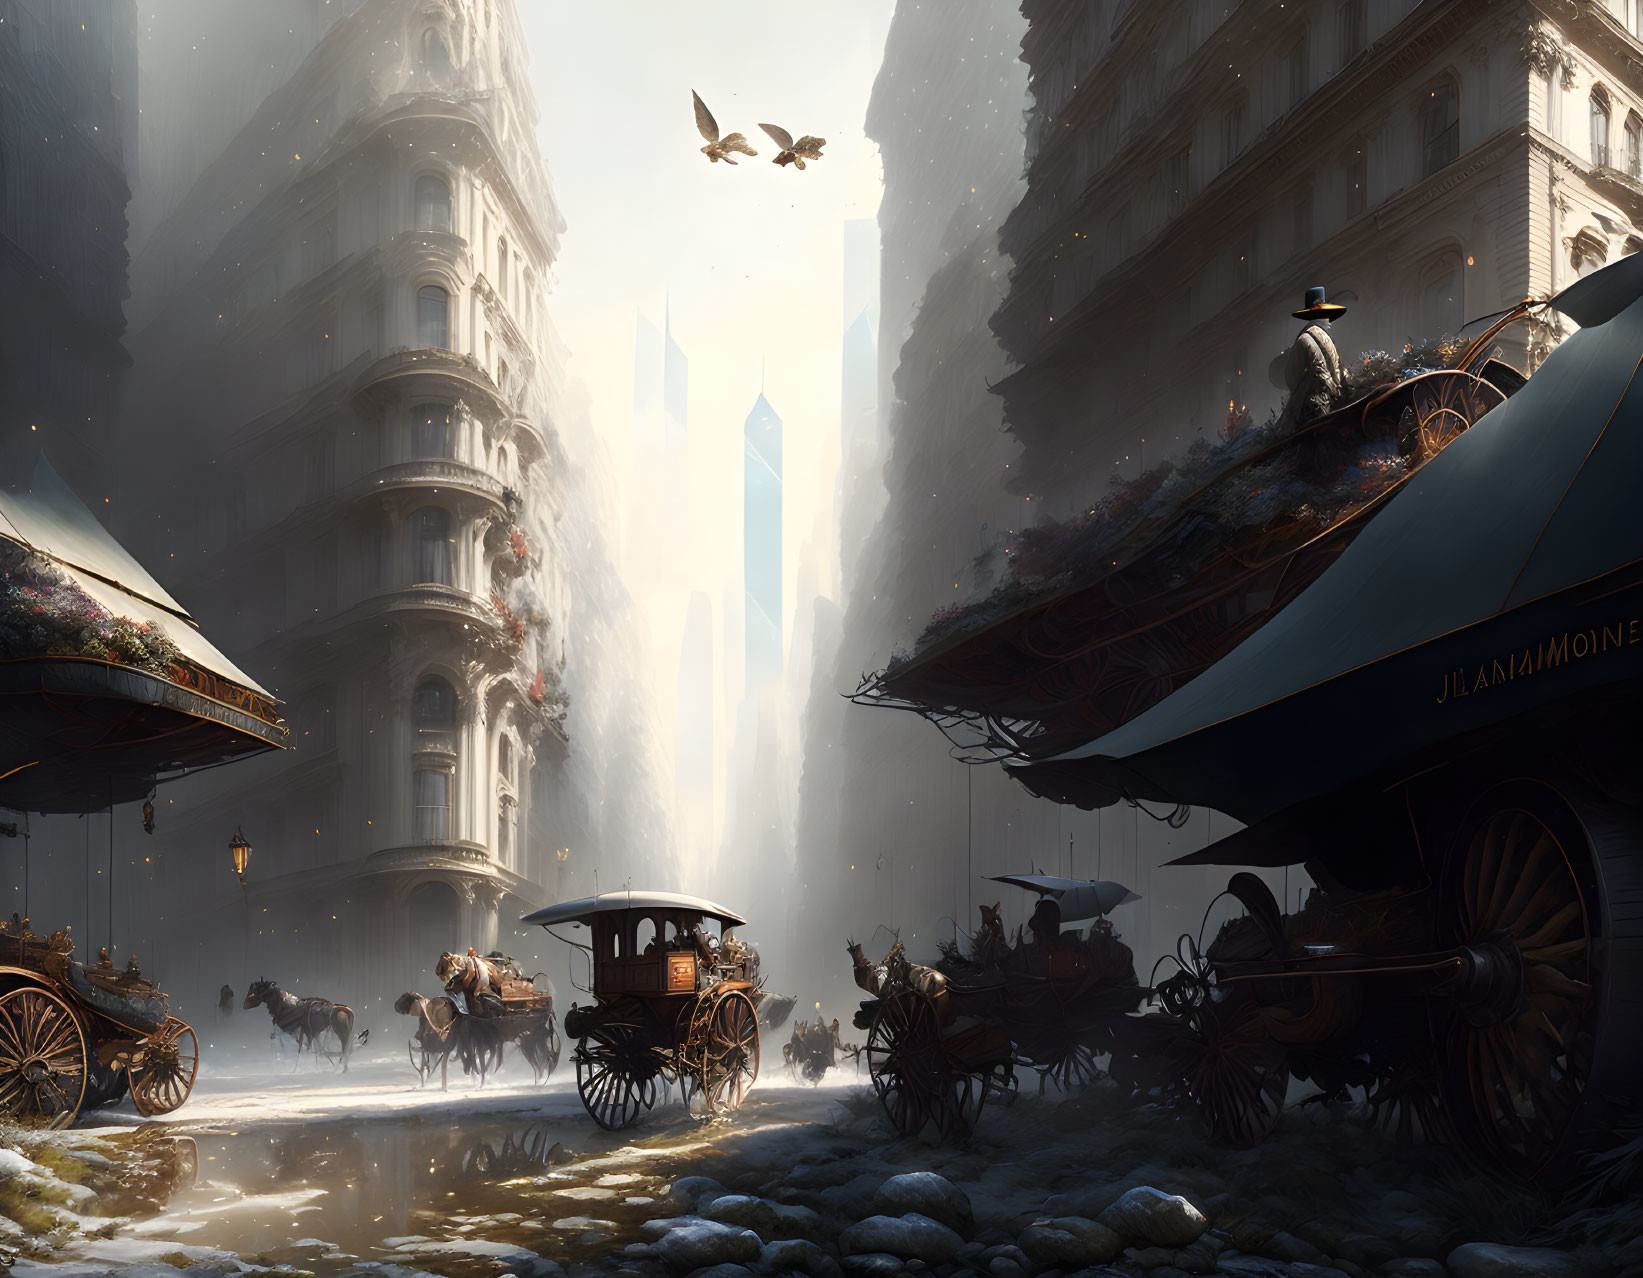 Fantasy cityscape with horse-drawn carriages and mixed architecture